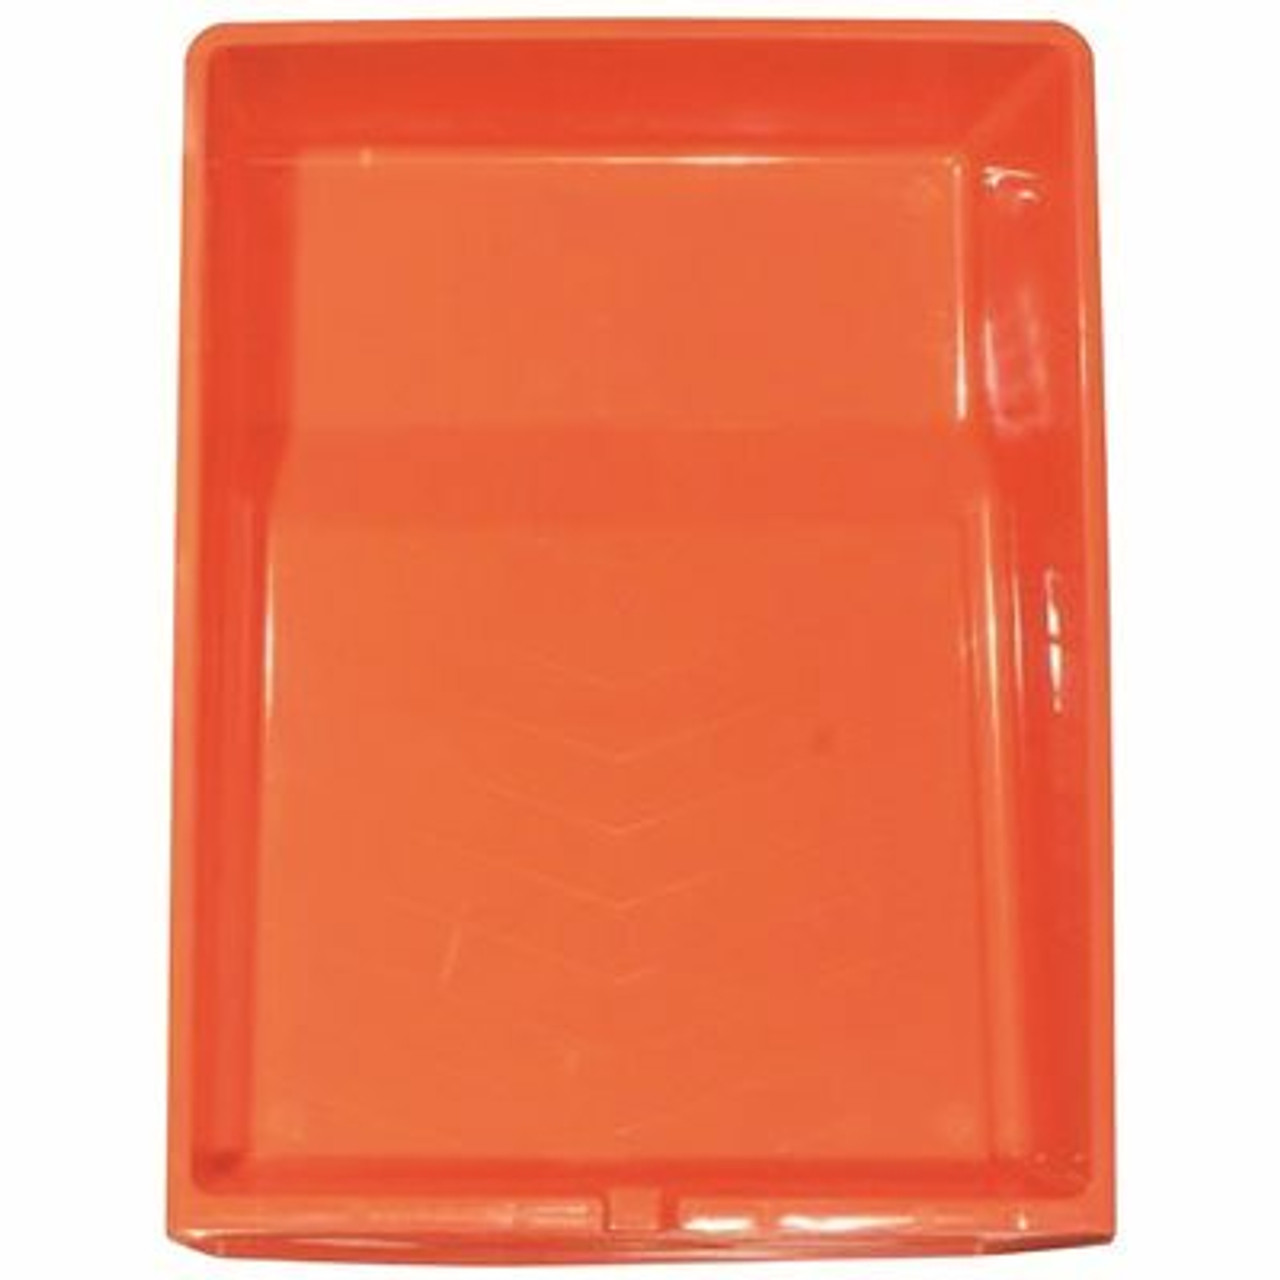 9 In. Deep Well Plastic Paint Roller Tray